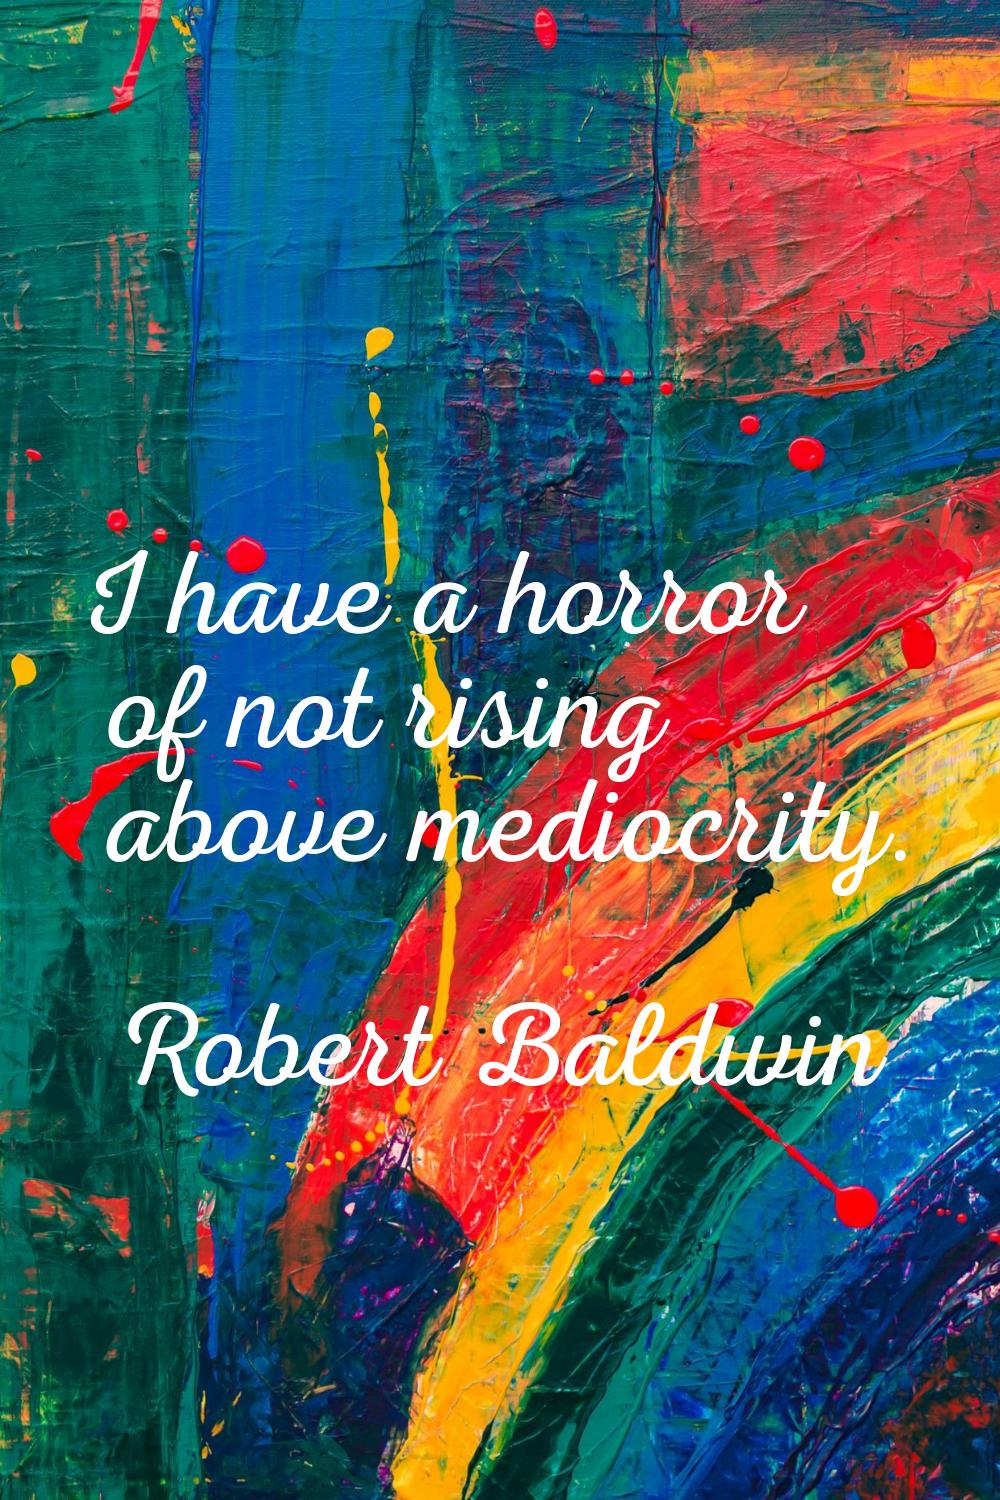 I have a horror of not rising above mediocrity.